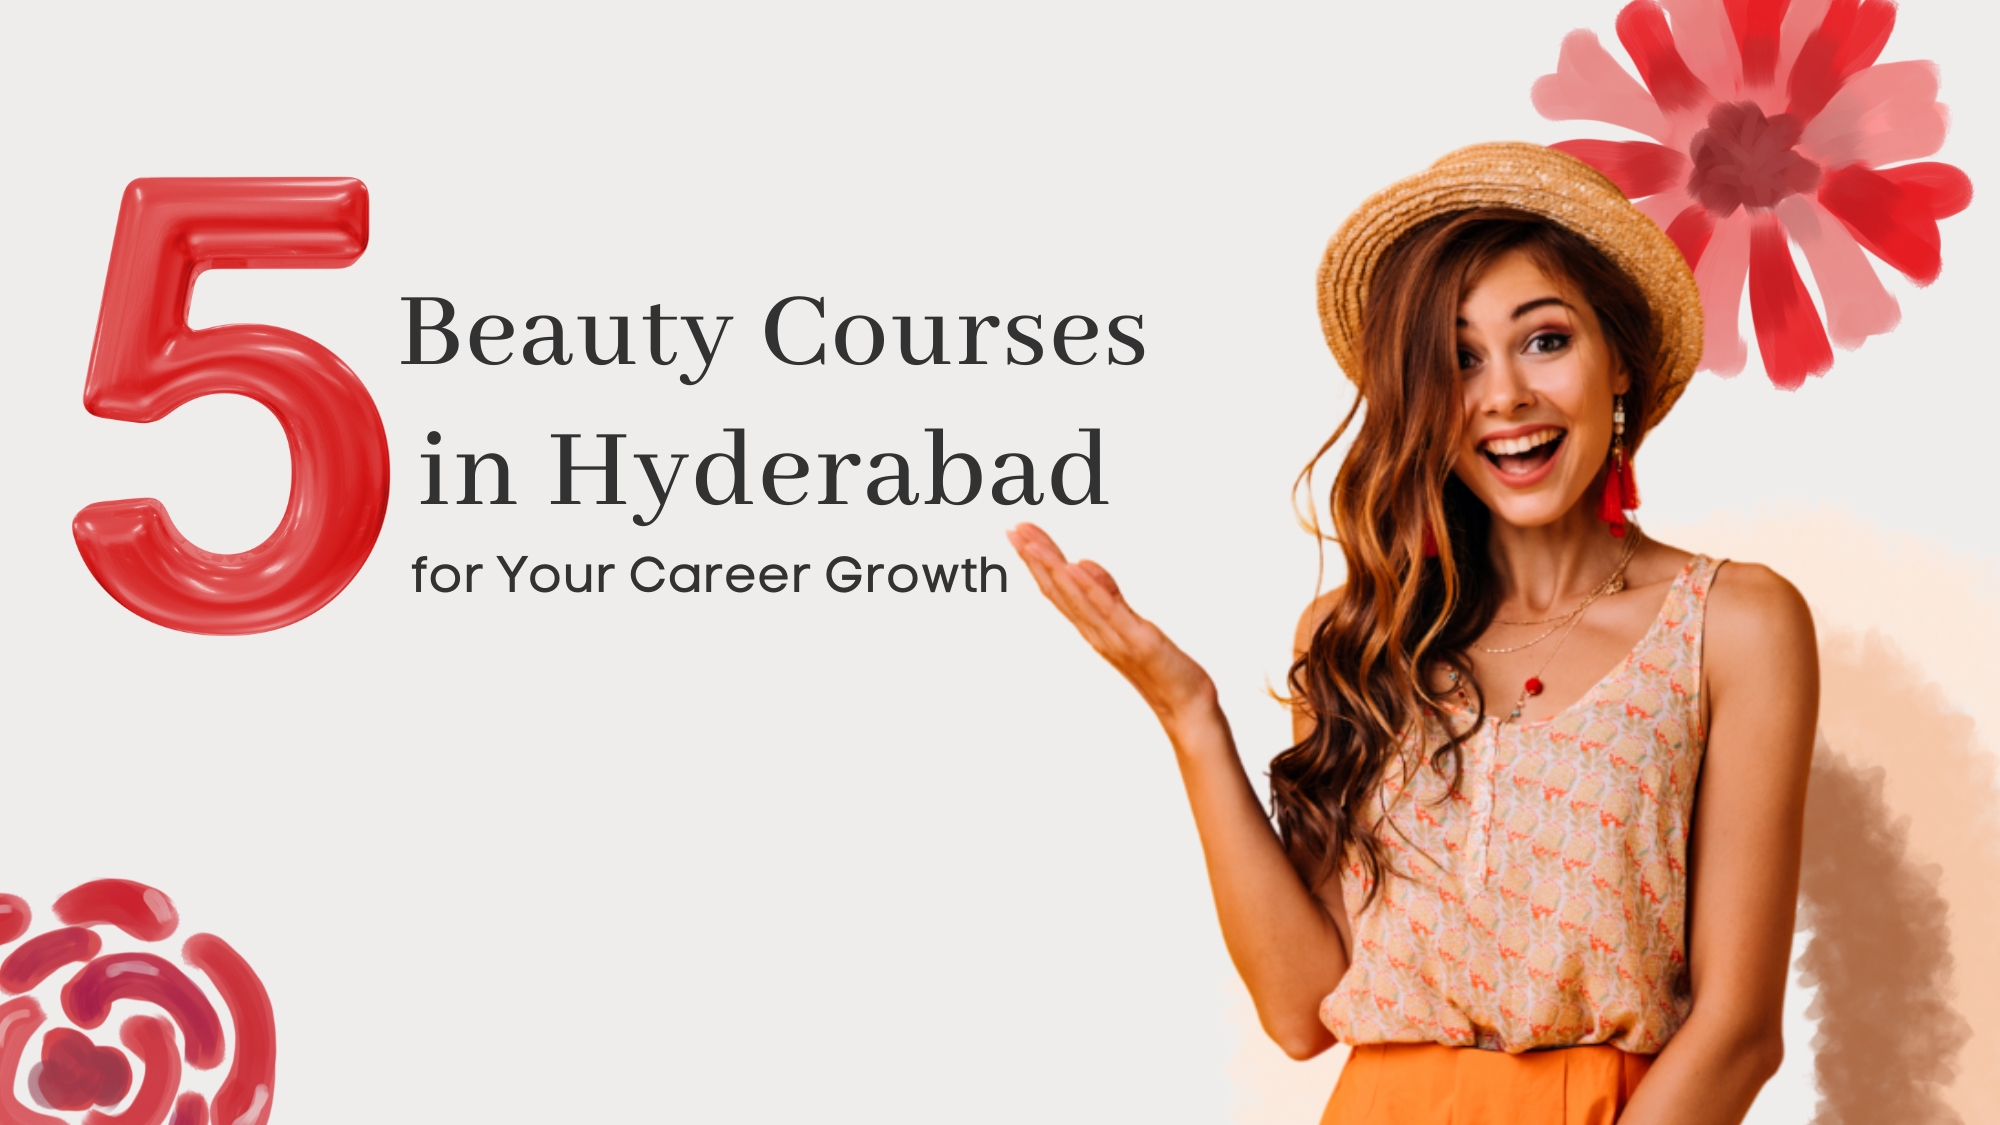 Beauty Courses in Hyderabad Our The BeauDemy Beauty Academy